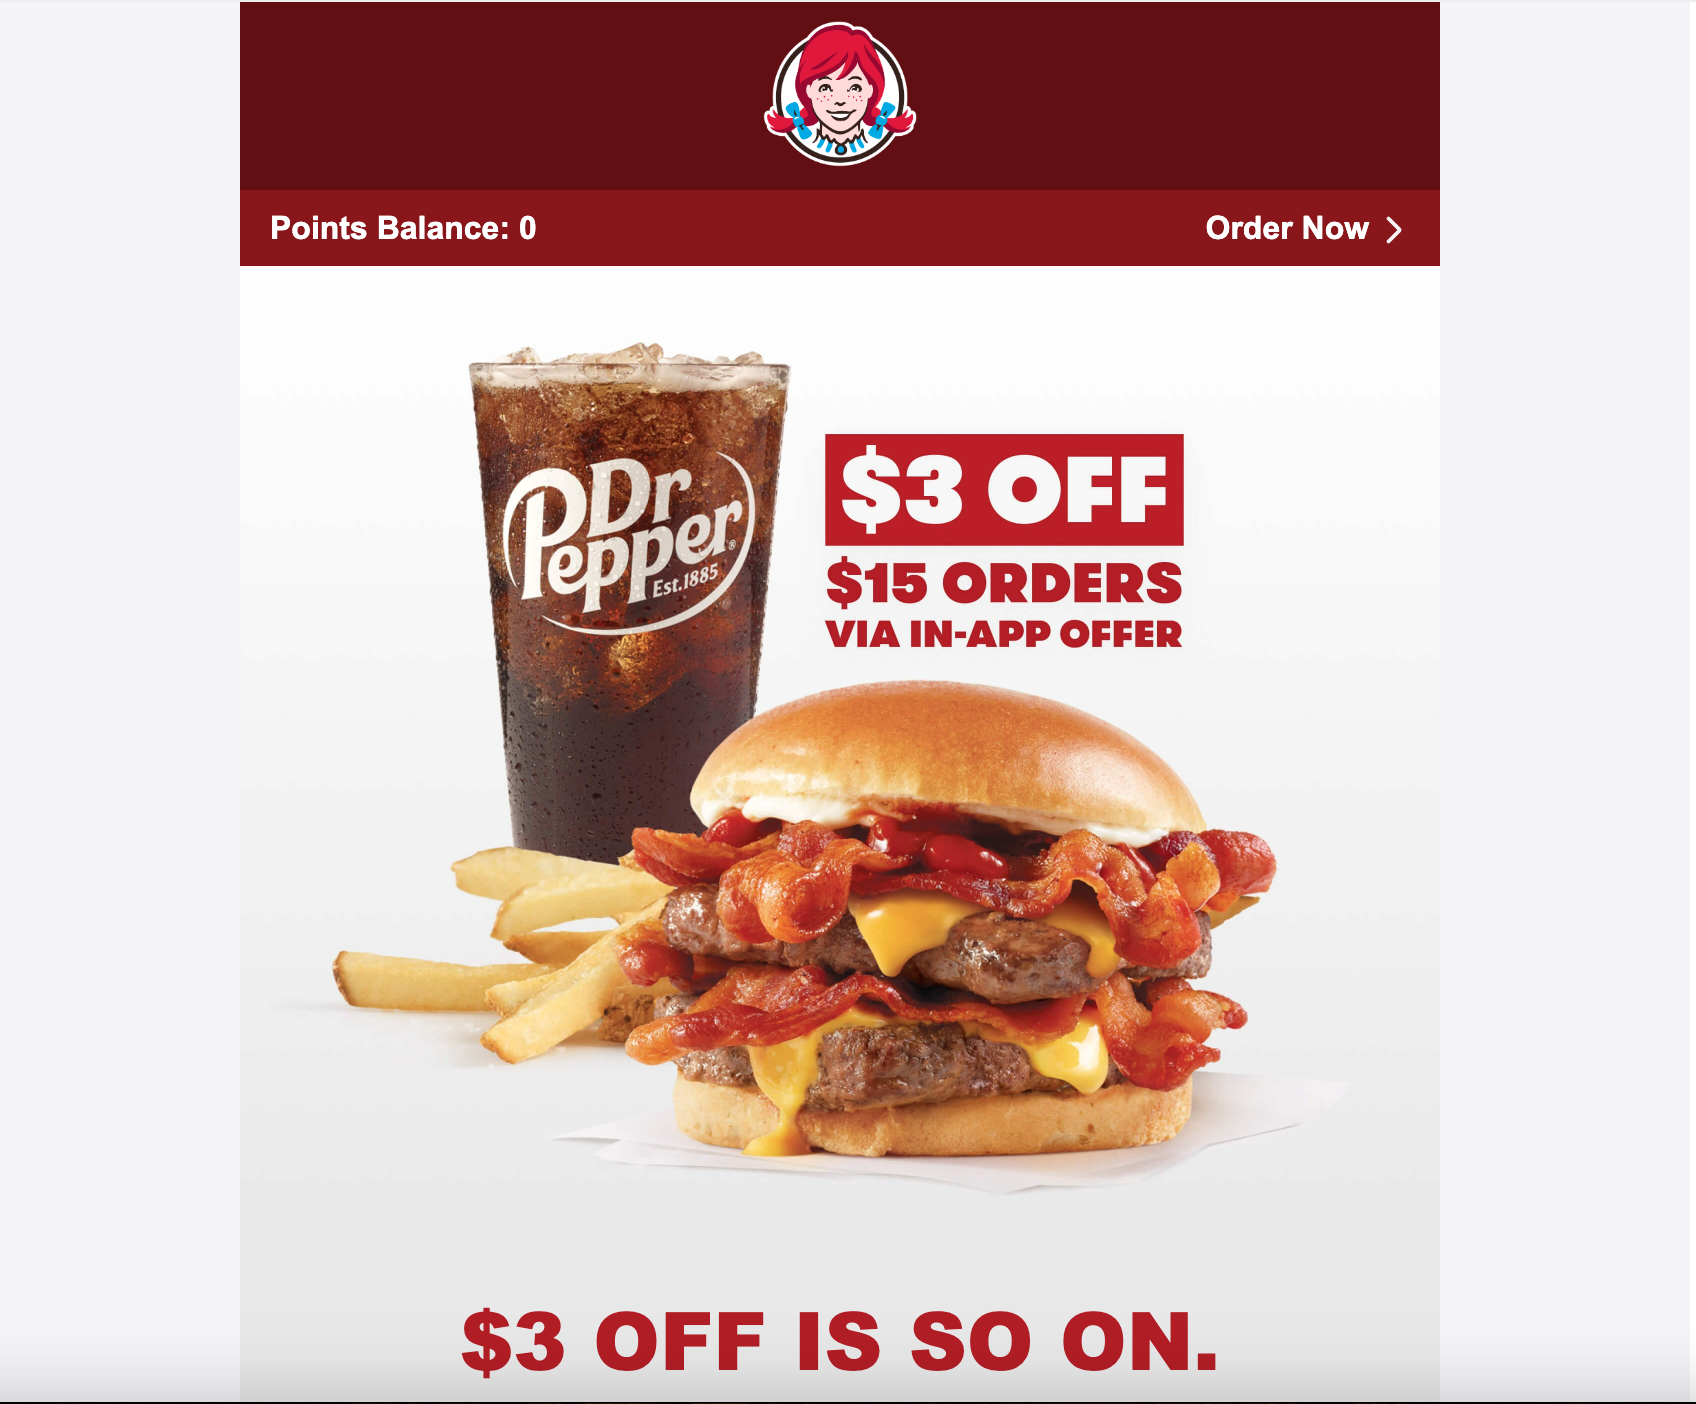 Wendy's email promotion.